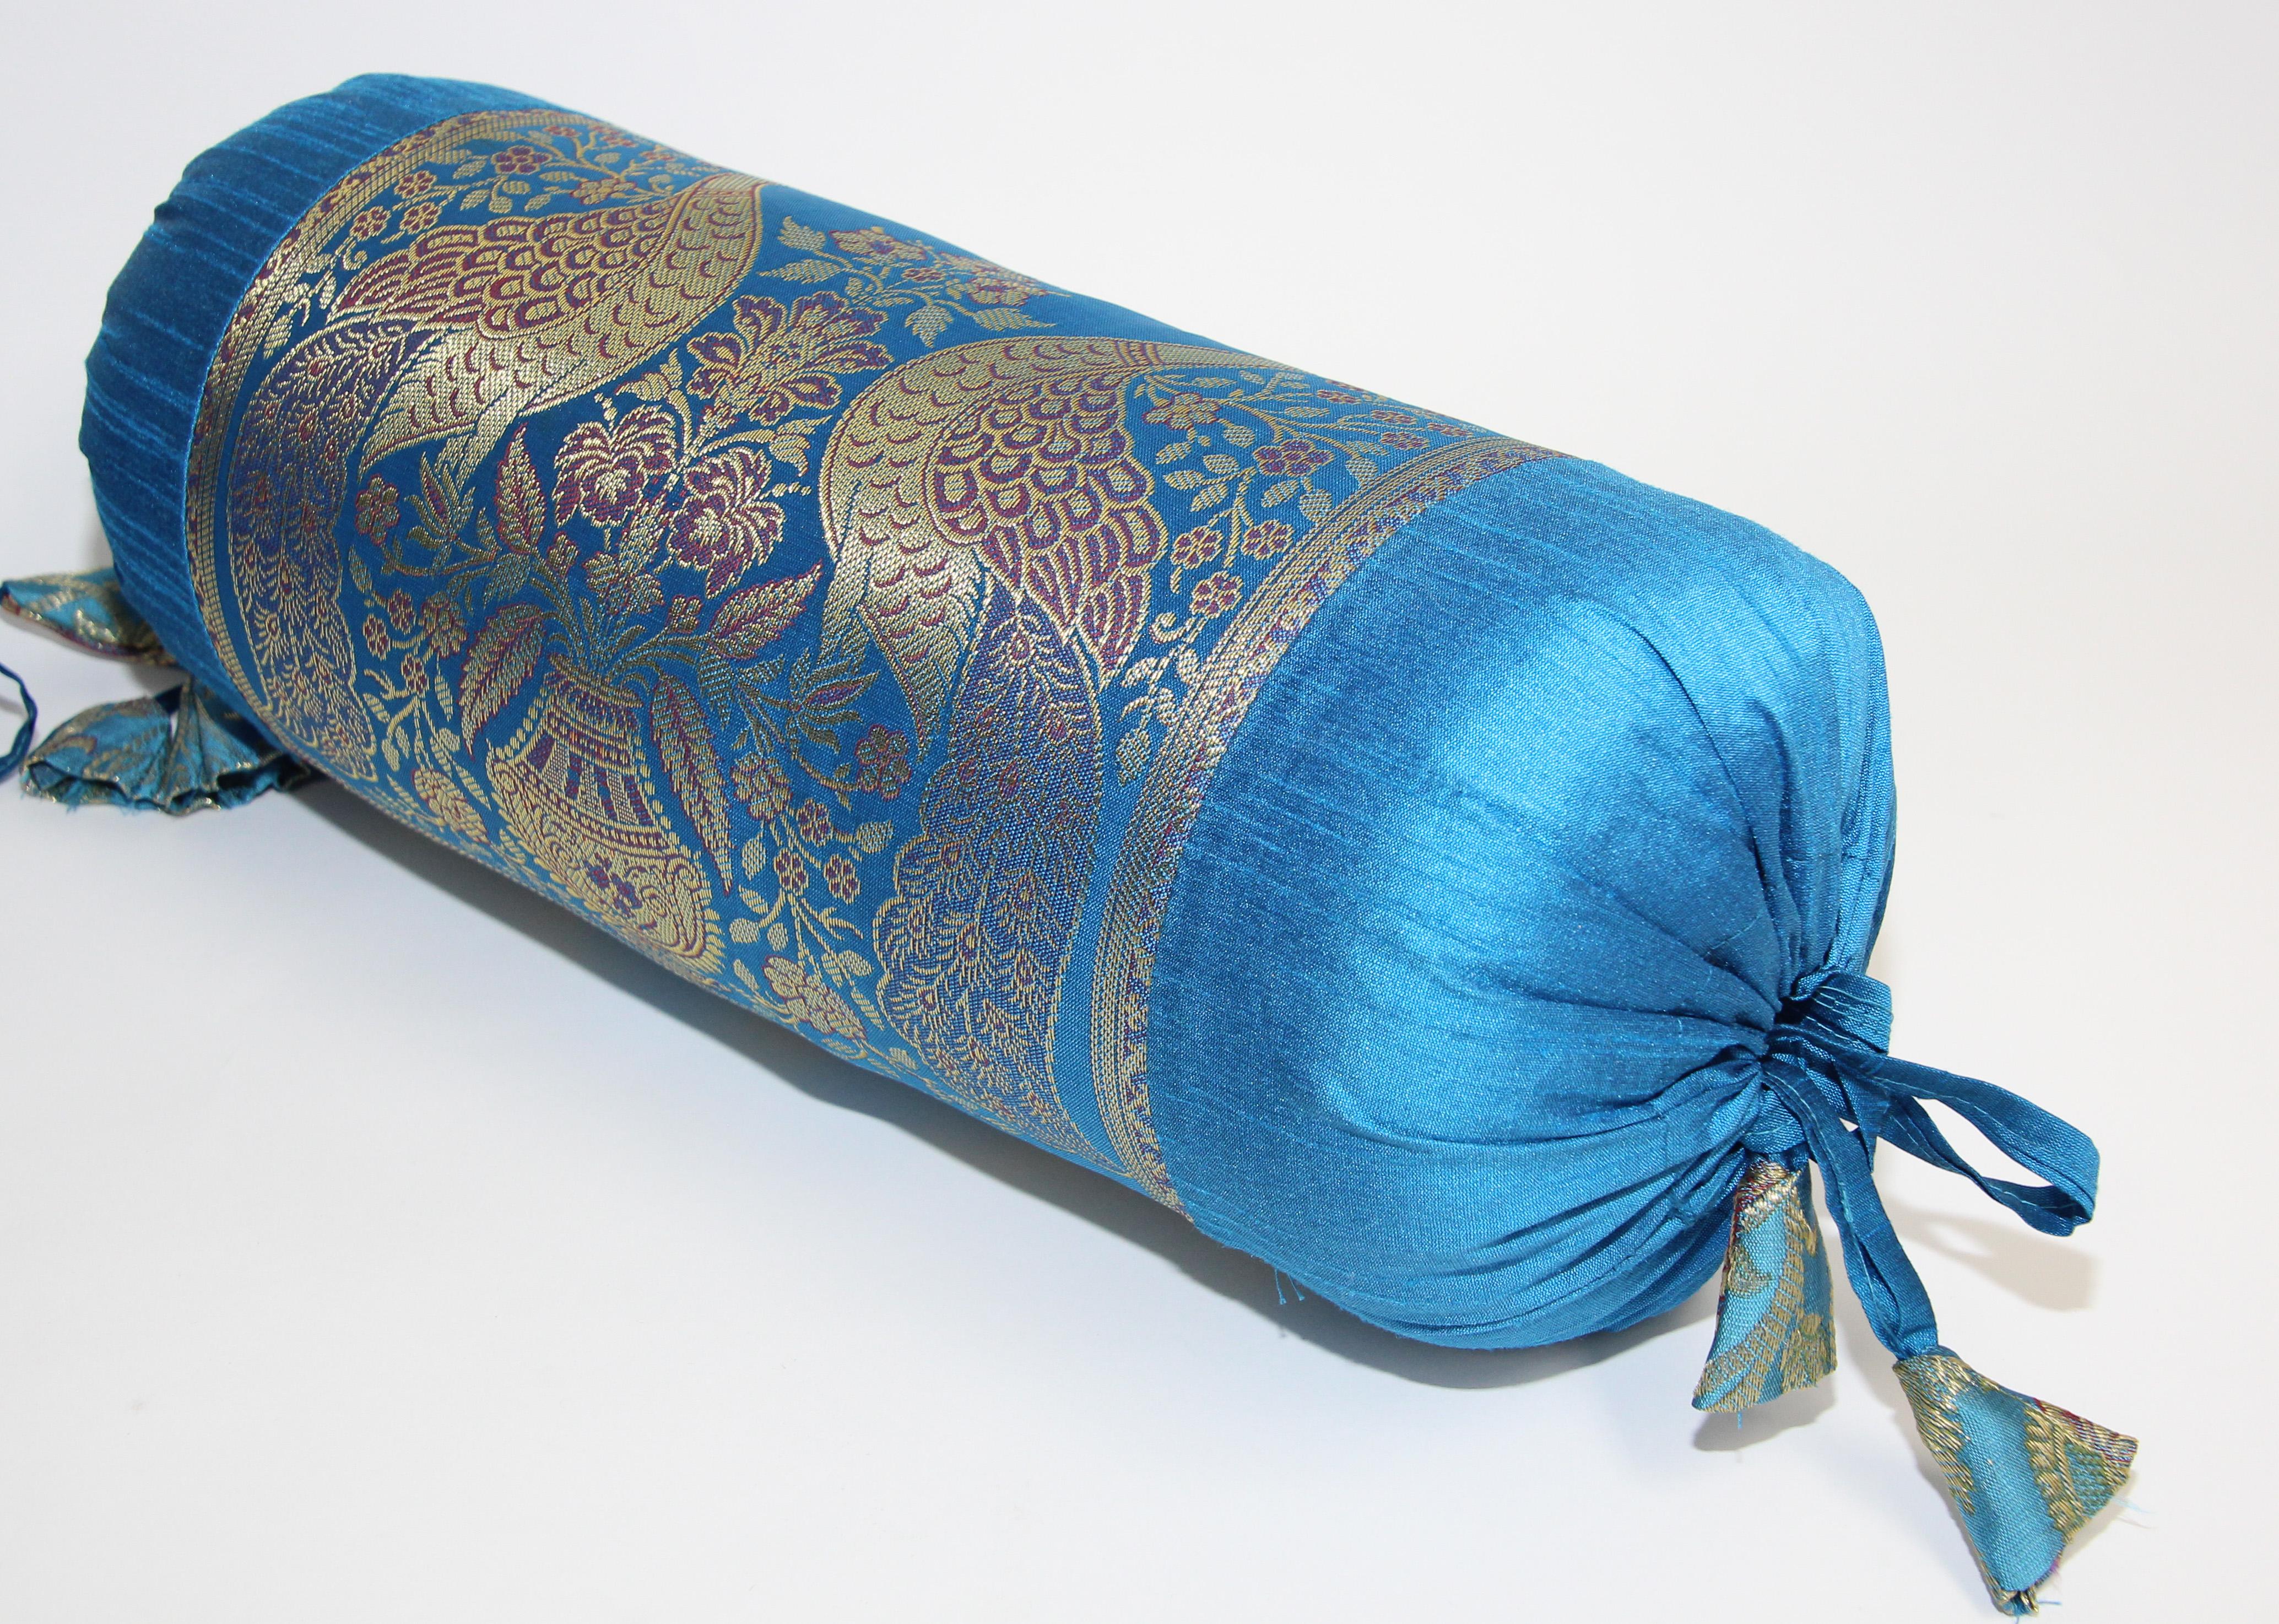 Hand-Crafted Vintage Brocade Silk Bolster Pillows Turquoise Blue and Gold Colors with Peacock For Sale